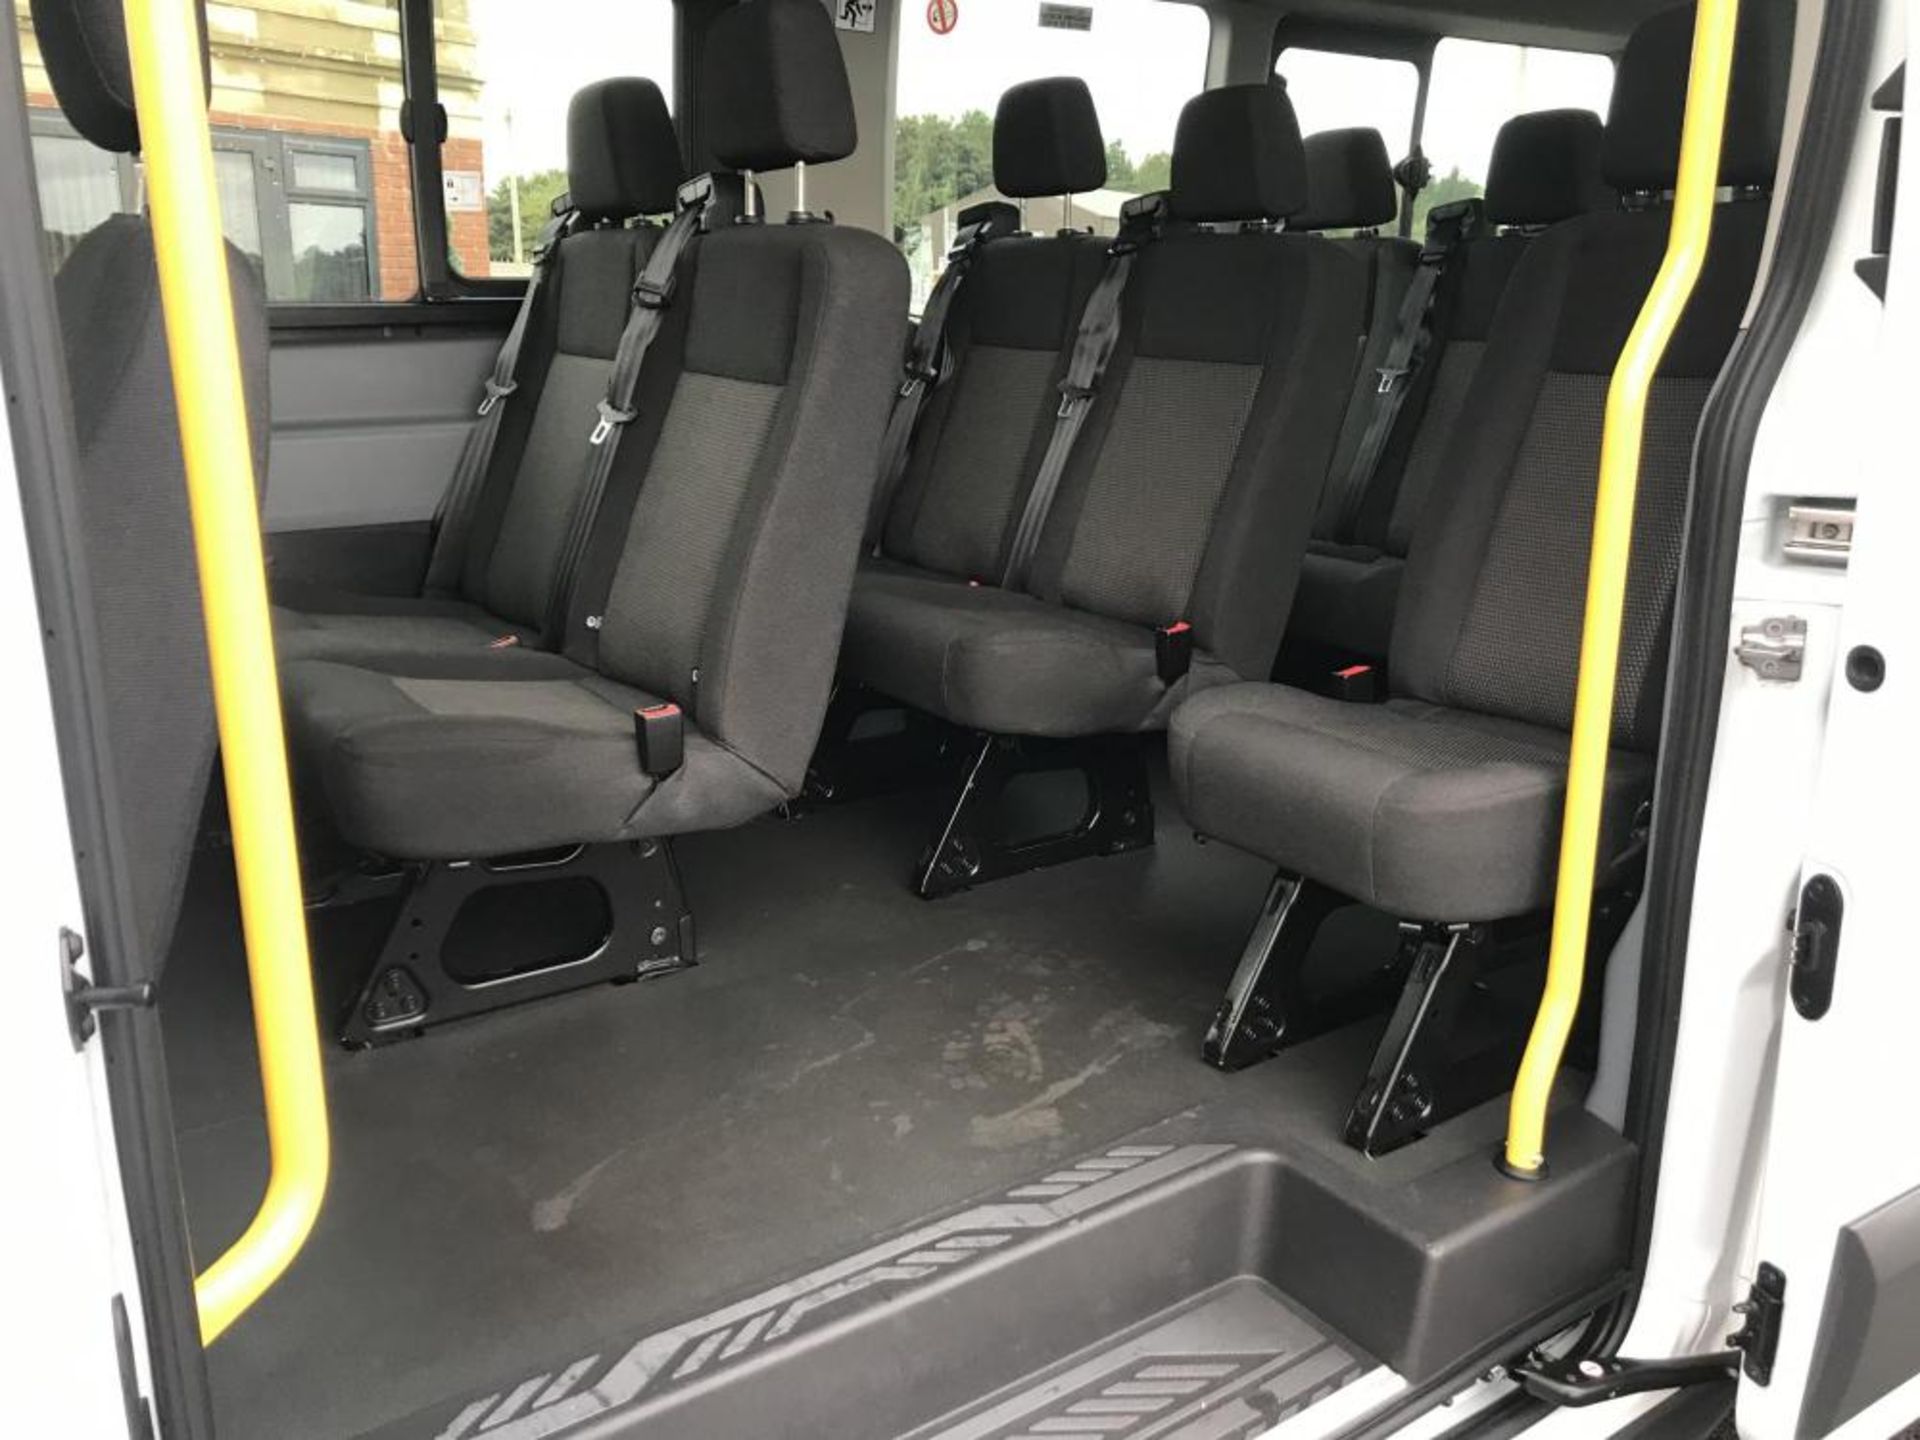 2017/17 REG FORD TRANSIT 460 ECONETIC TECH 2.2 DIESEL WHITE 17 SEAT MINIBUS, SHOWING 0 FORMER KEEPER - Image 16 of 17